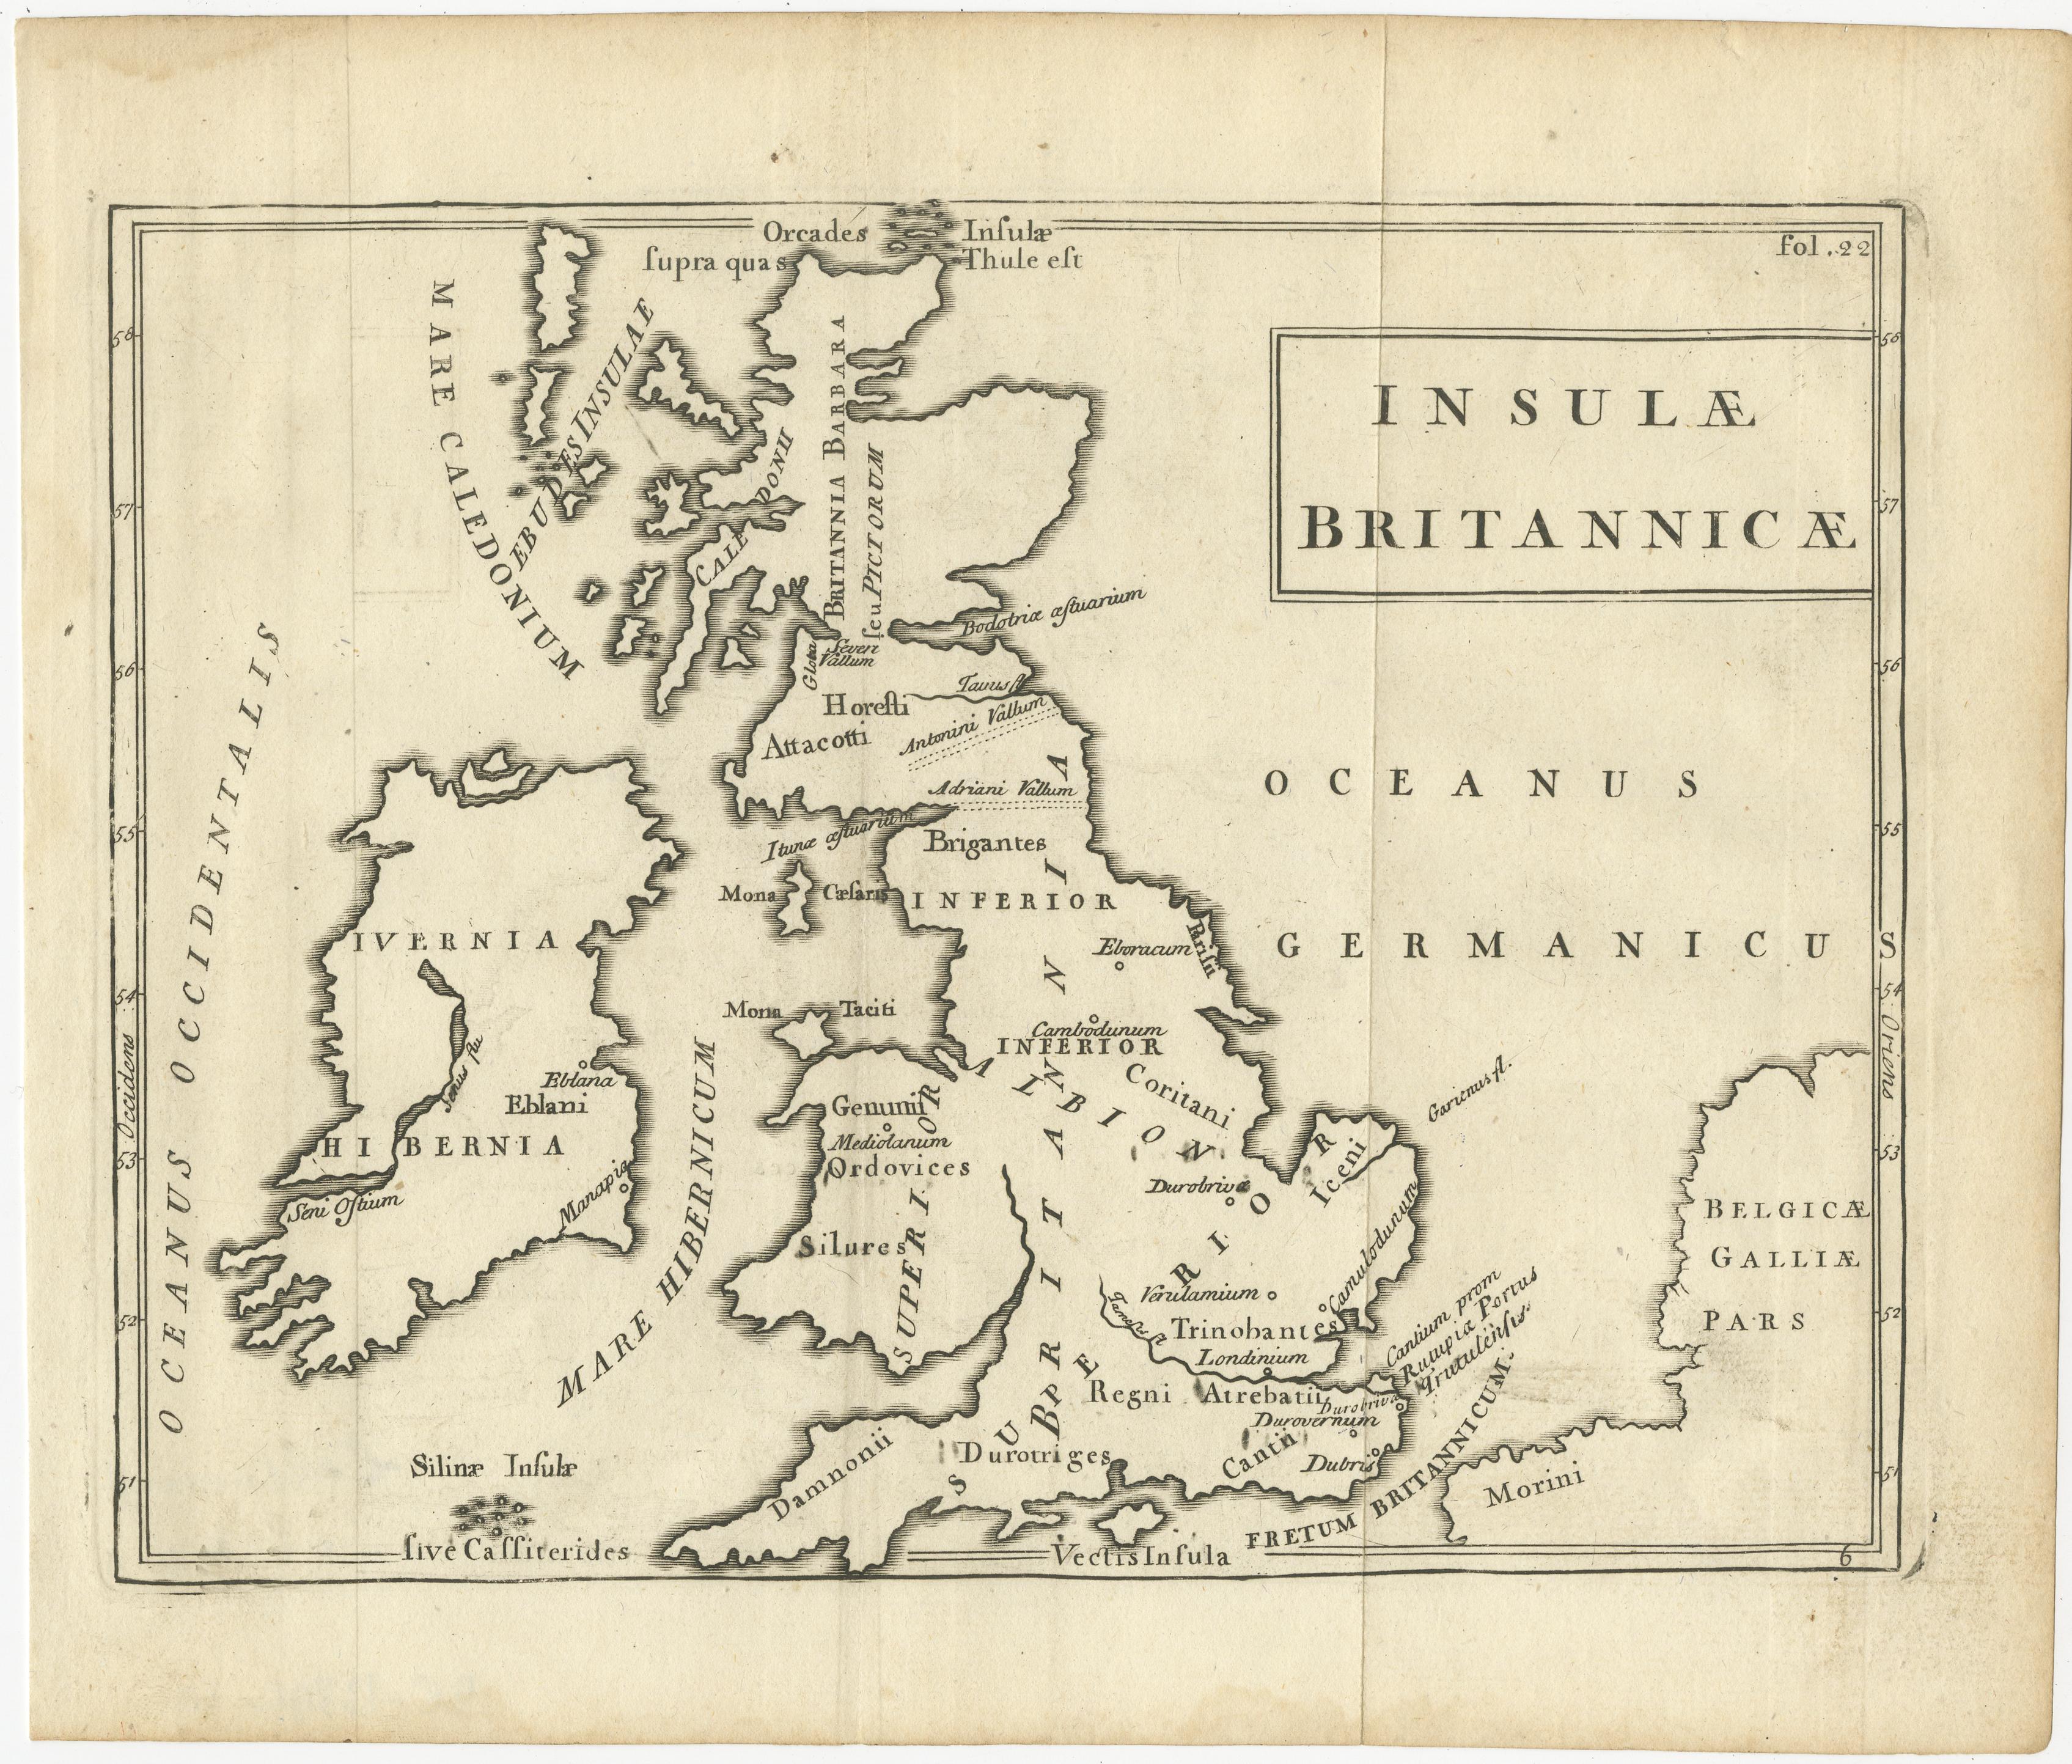 Antique map titled 'Insulae Britannicae'. Interesting map of Britain, Scotland, and Ireland. It shows a rudimentary outline of the islands according to the geography of the Roman Empire, after Caesar’s legions subjugated the numerous local tribes in